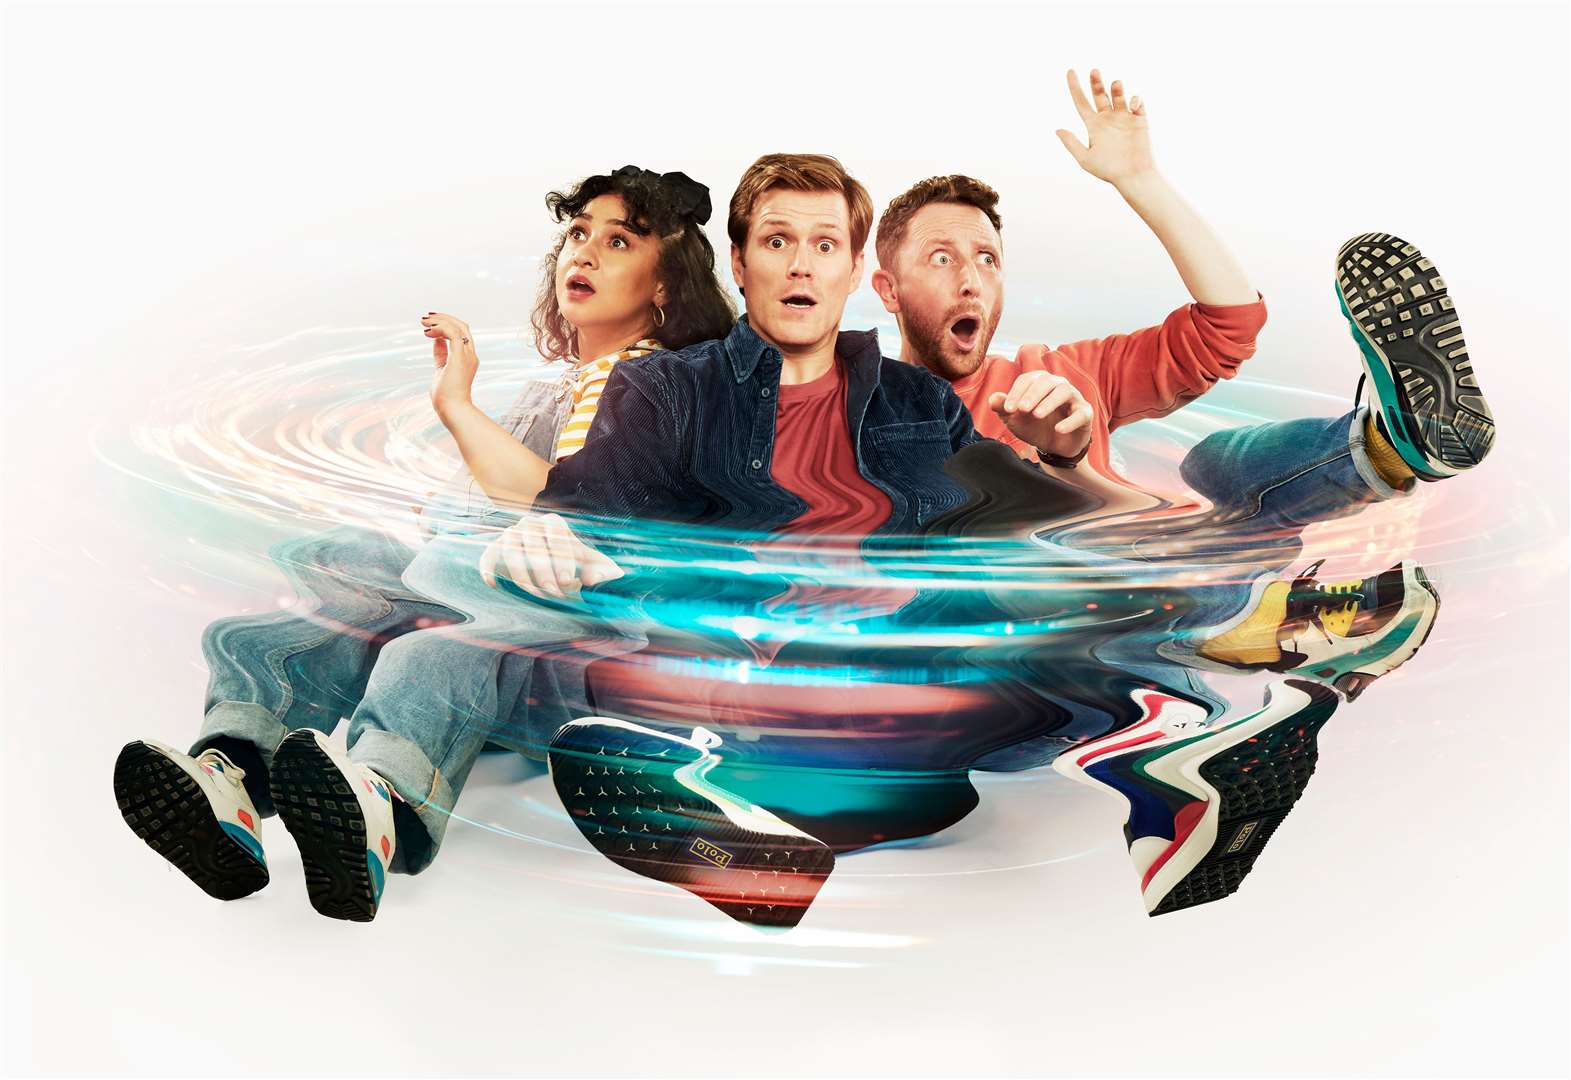 The Original Theatre Company is touring its production of The Time Machine - A Comedy